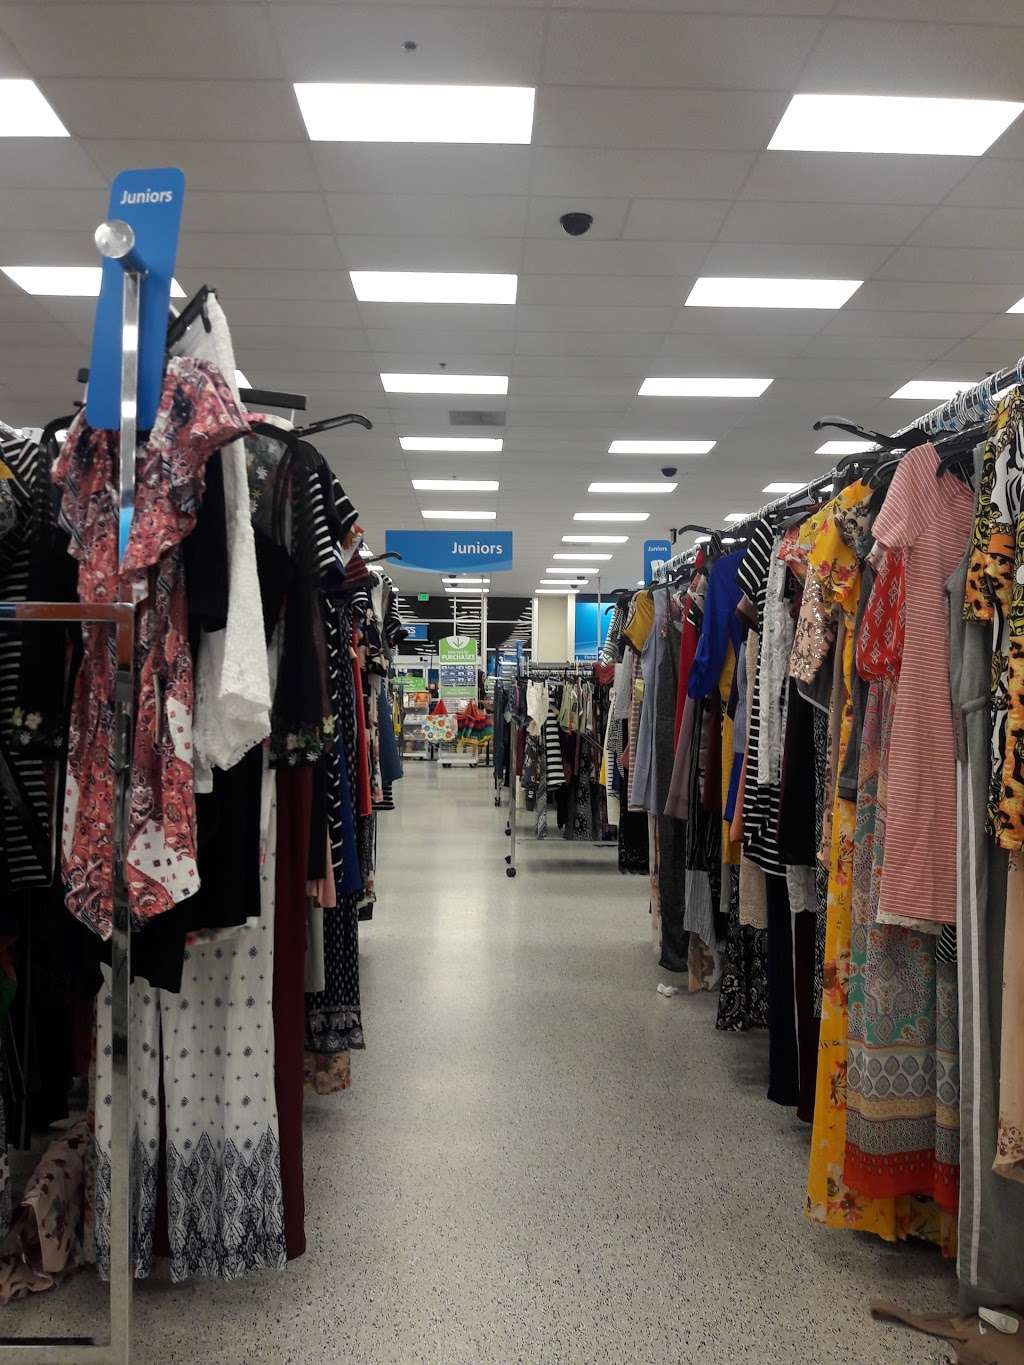 Ross Dress for Less | 20352 US Highway 18, Apple Valley, CA 92307, USA | Phone: (760) 961-2183